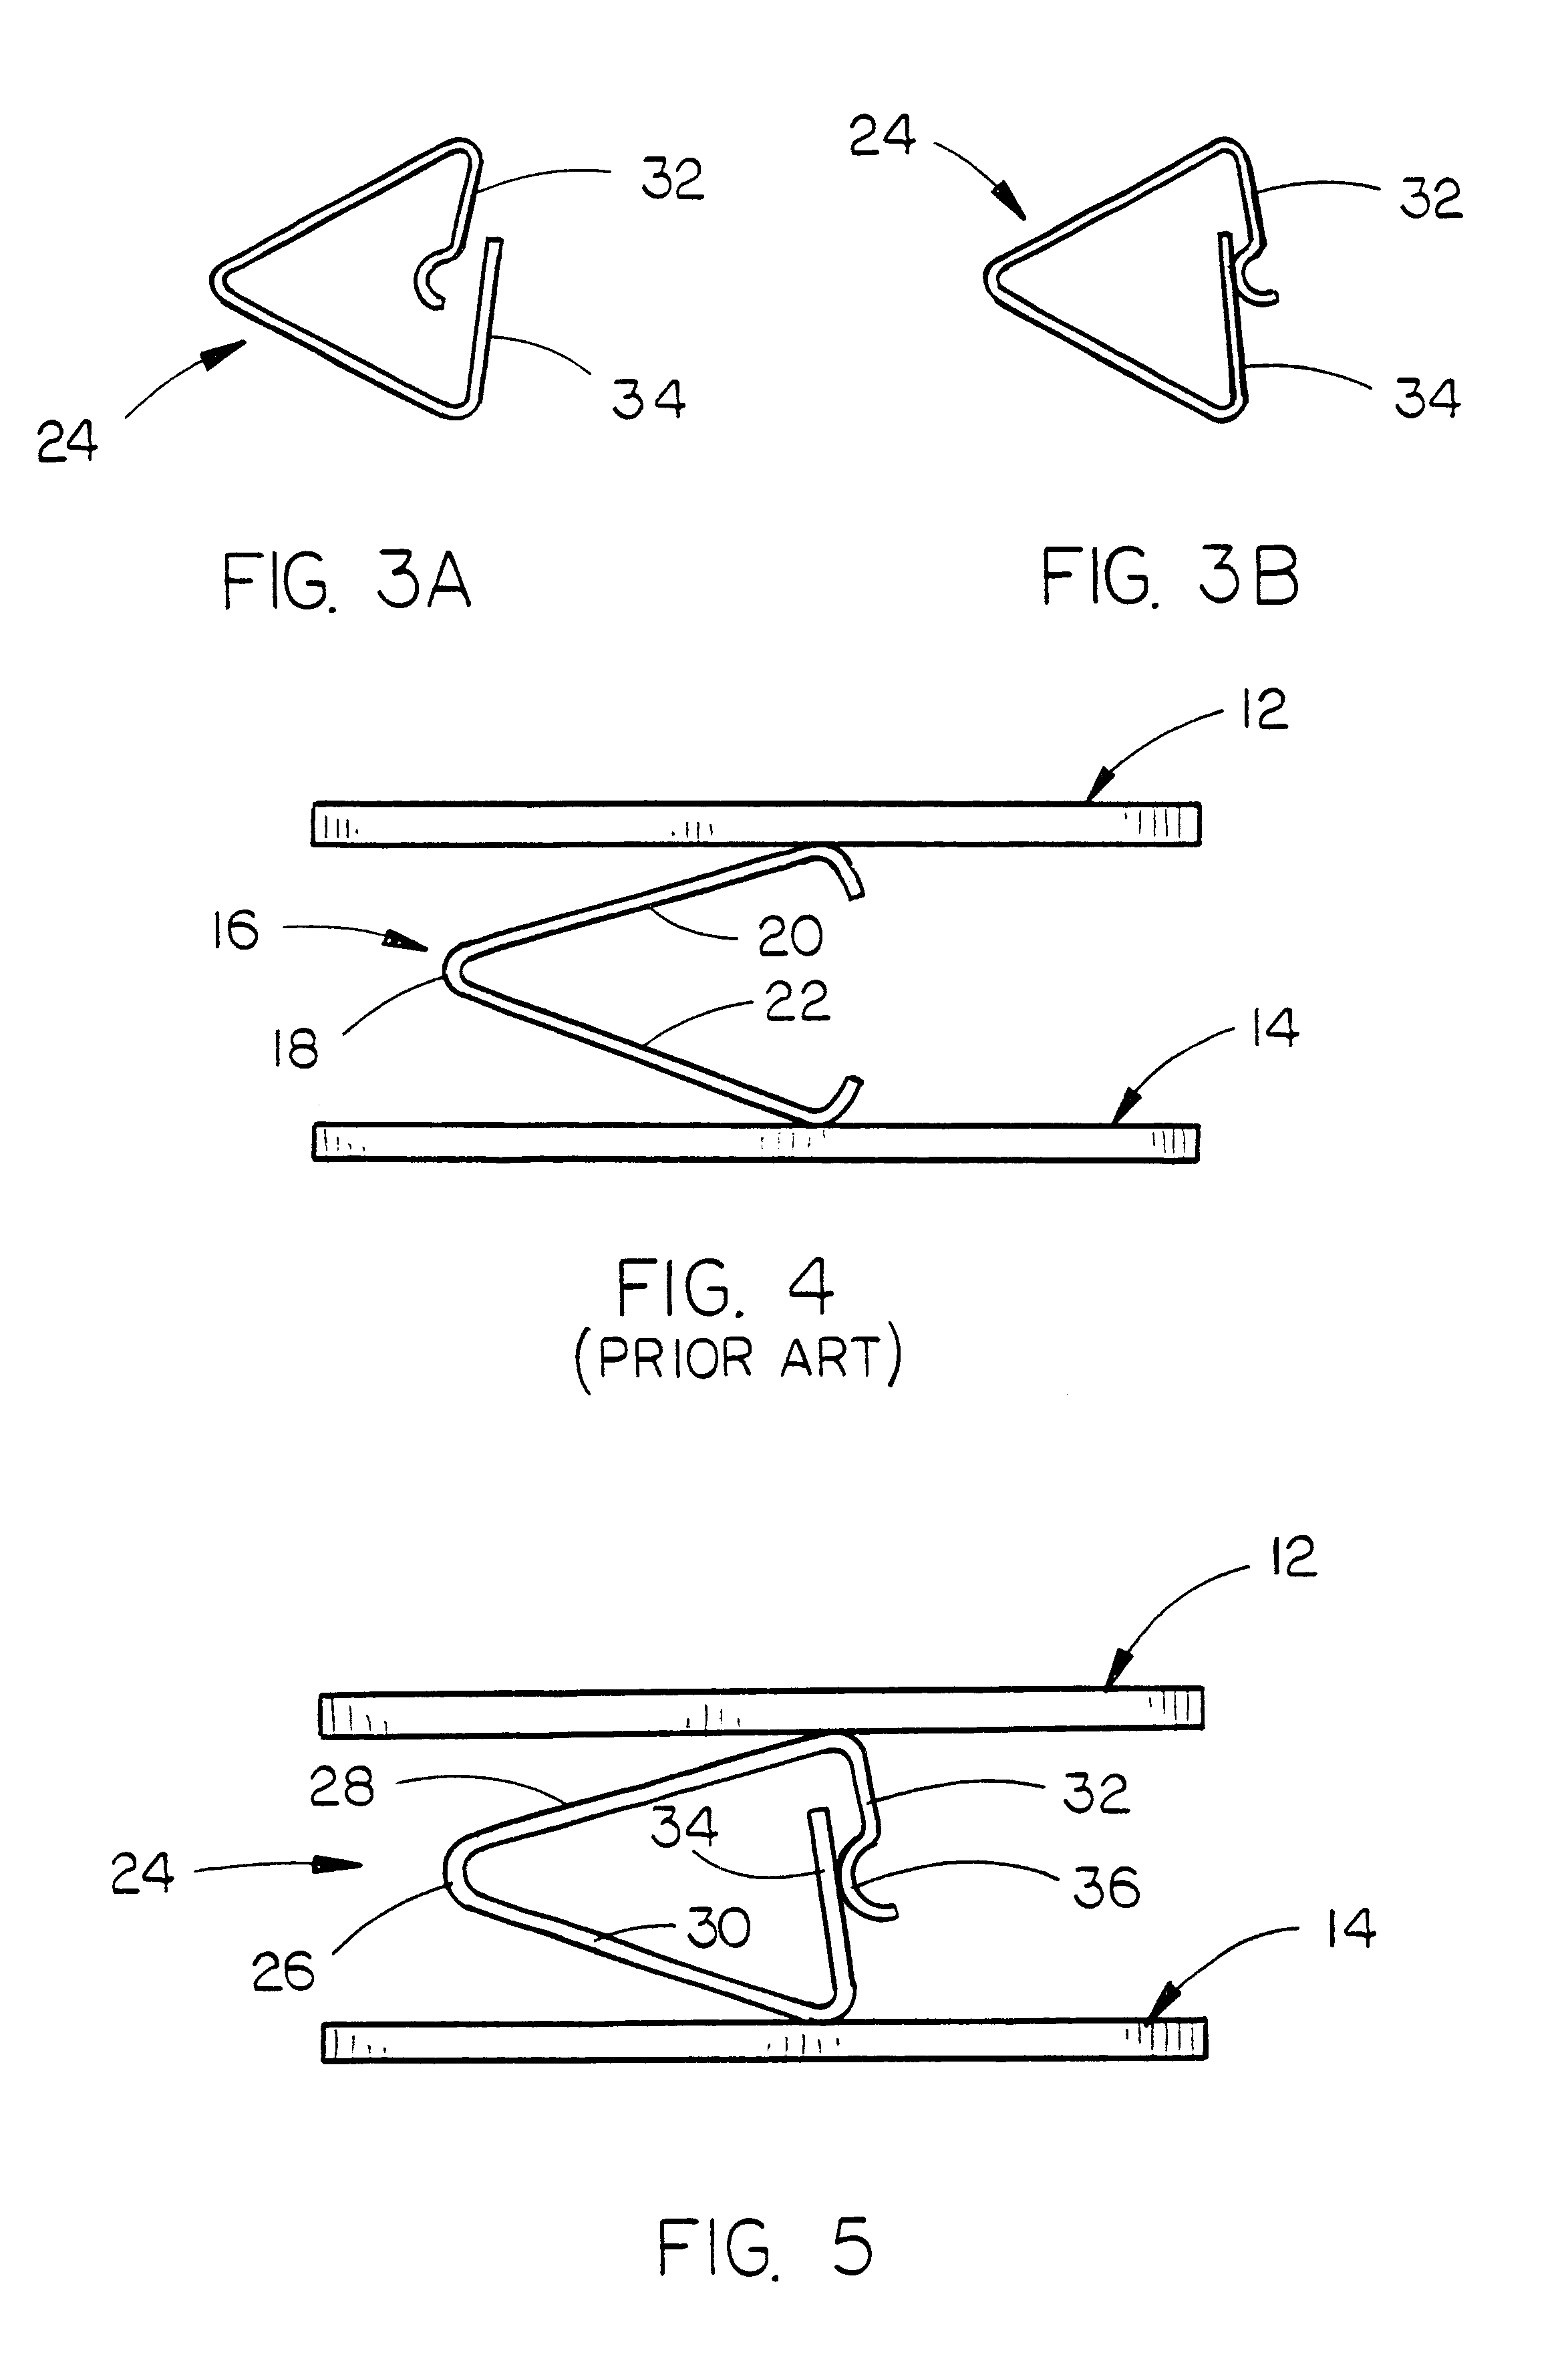 Switch contact for a planar inverted F antenna